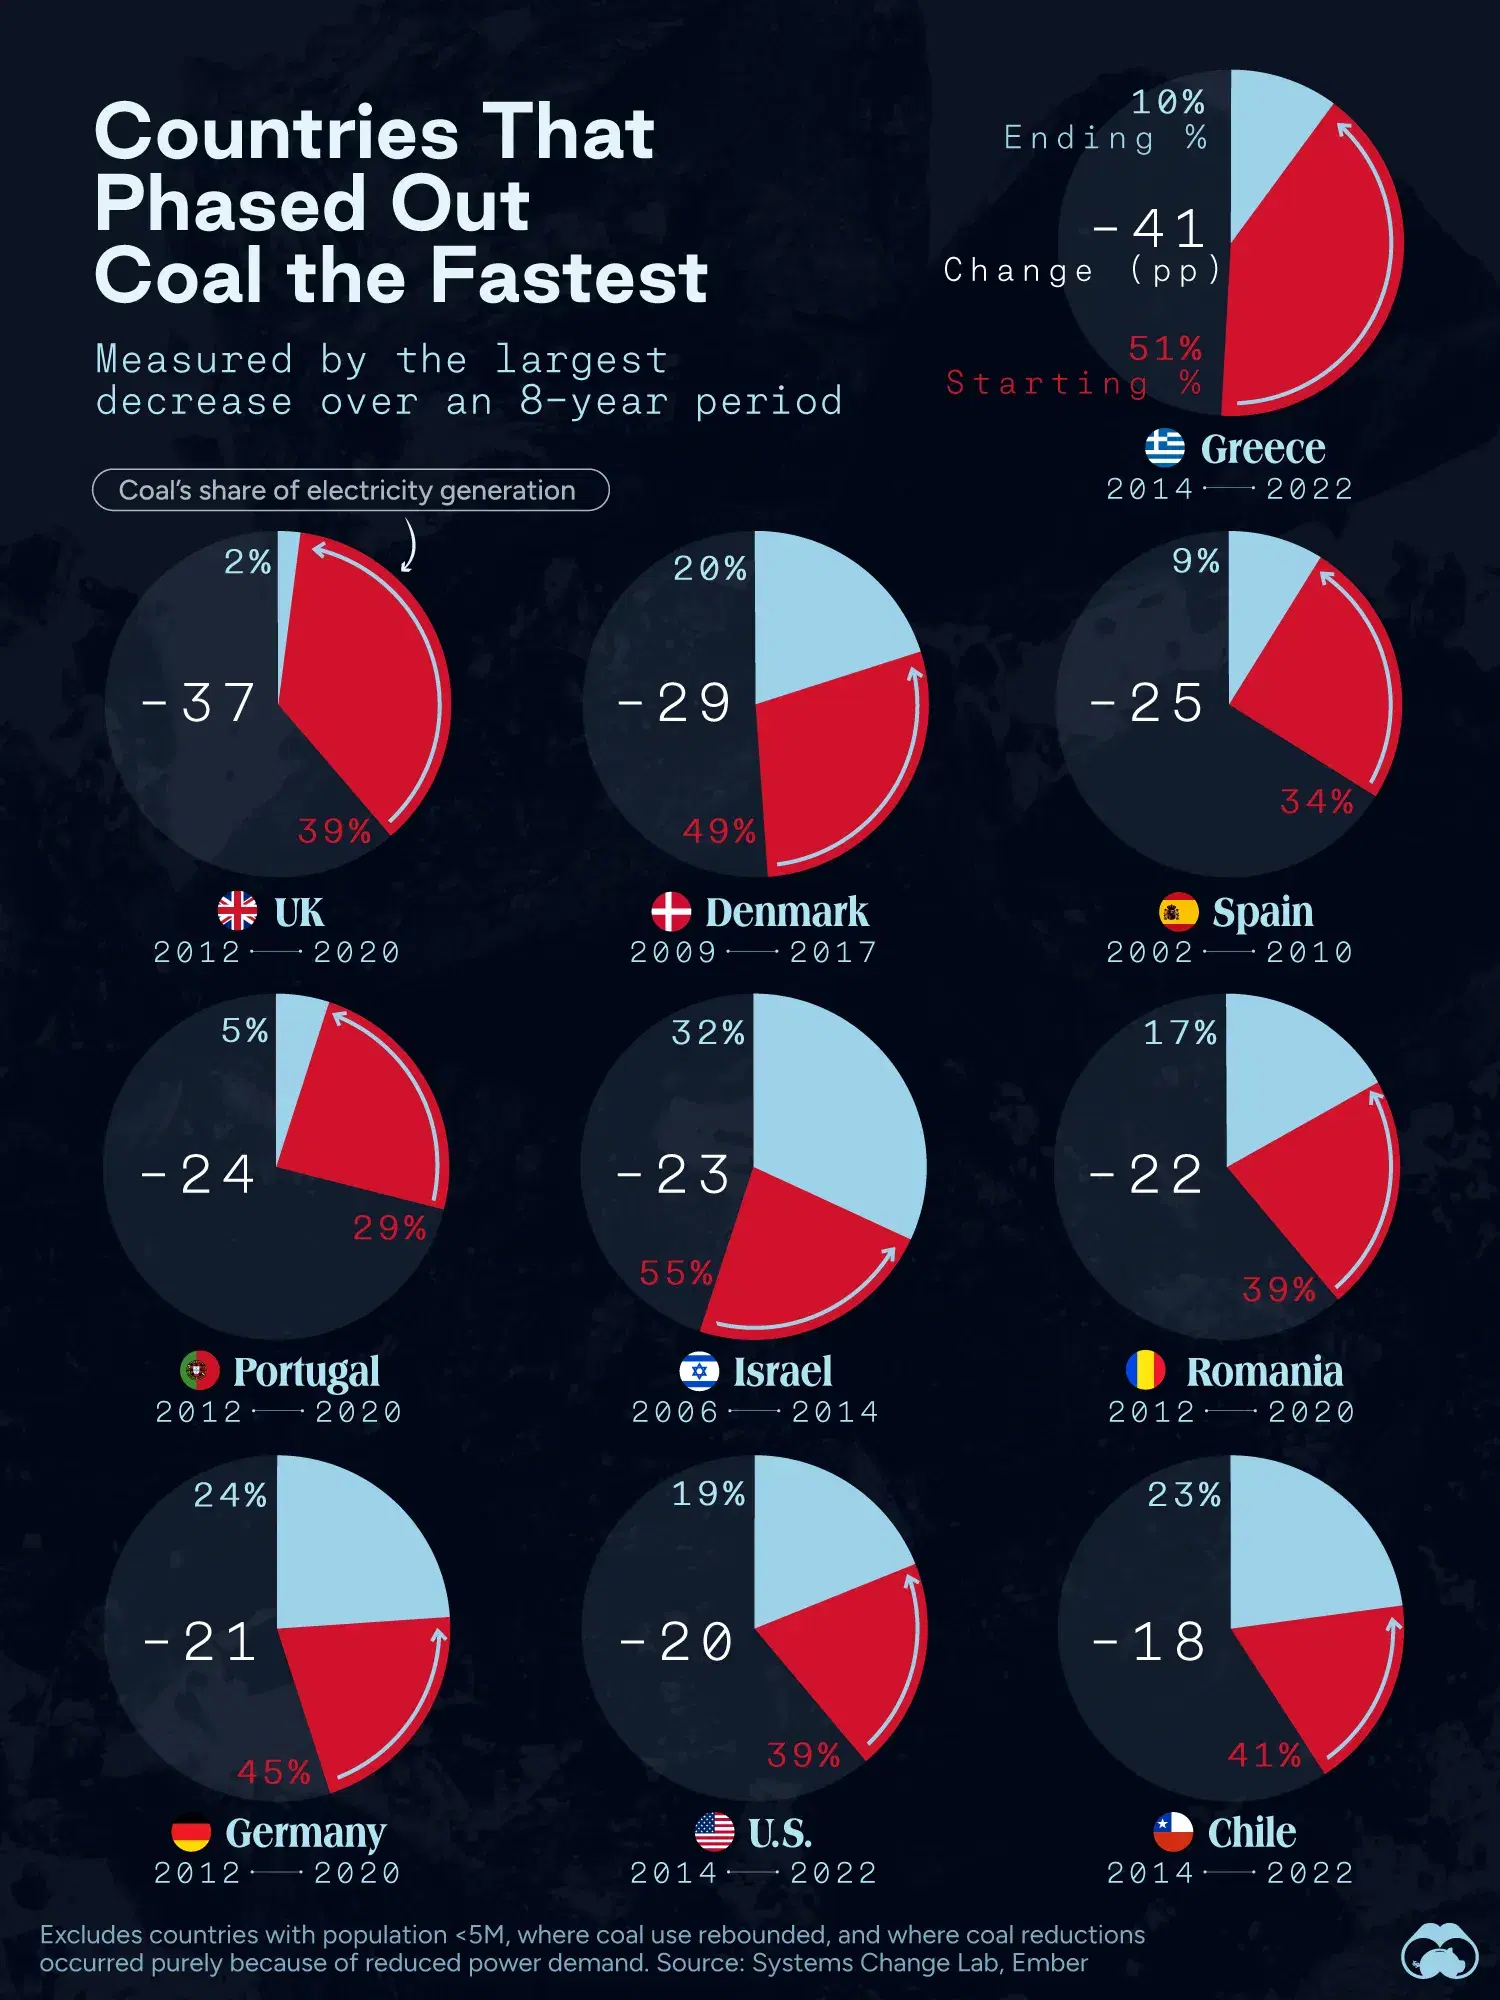 These Countries Reduced Coal Usage the Most Over an 8-Yr Period 🏭